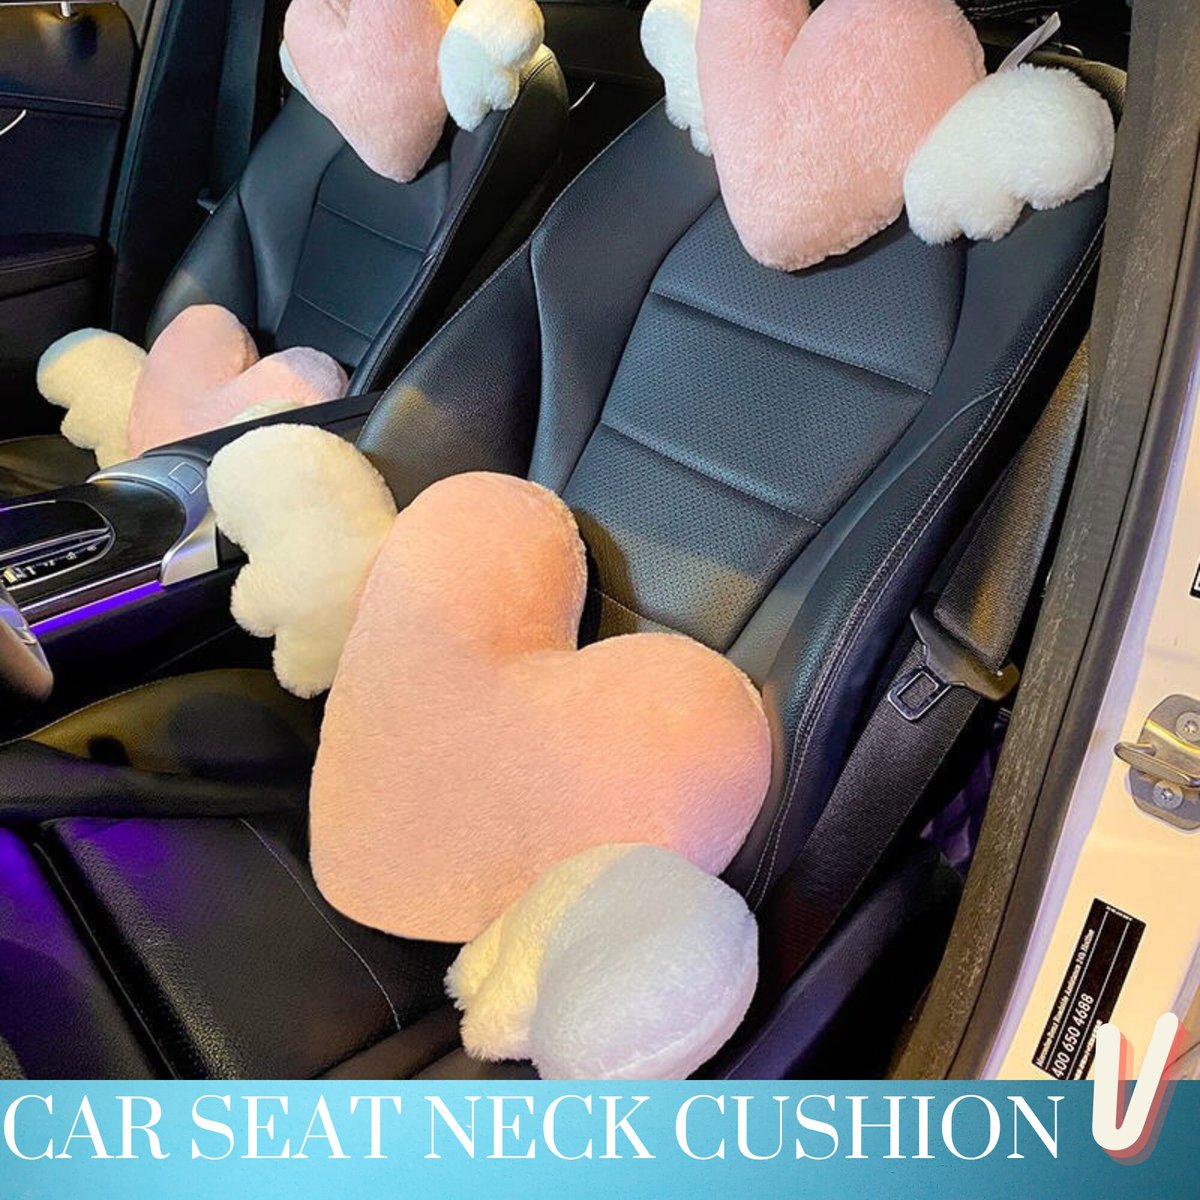 Excited to share the latest addition to my #etsy shop: Plush Pillow Car Accessories, Heart Plush Women Car Gift. etsy.me/3jwckKF #white #caraccessories #newcargift #carseatcover #cardecorforwomen #carneckcushion #carbackpillow #uniqueaccessories #carheadrest